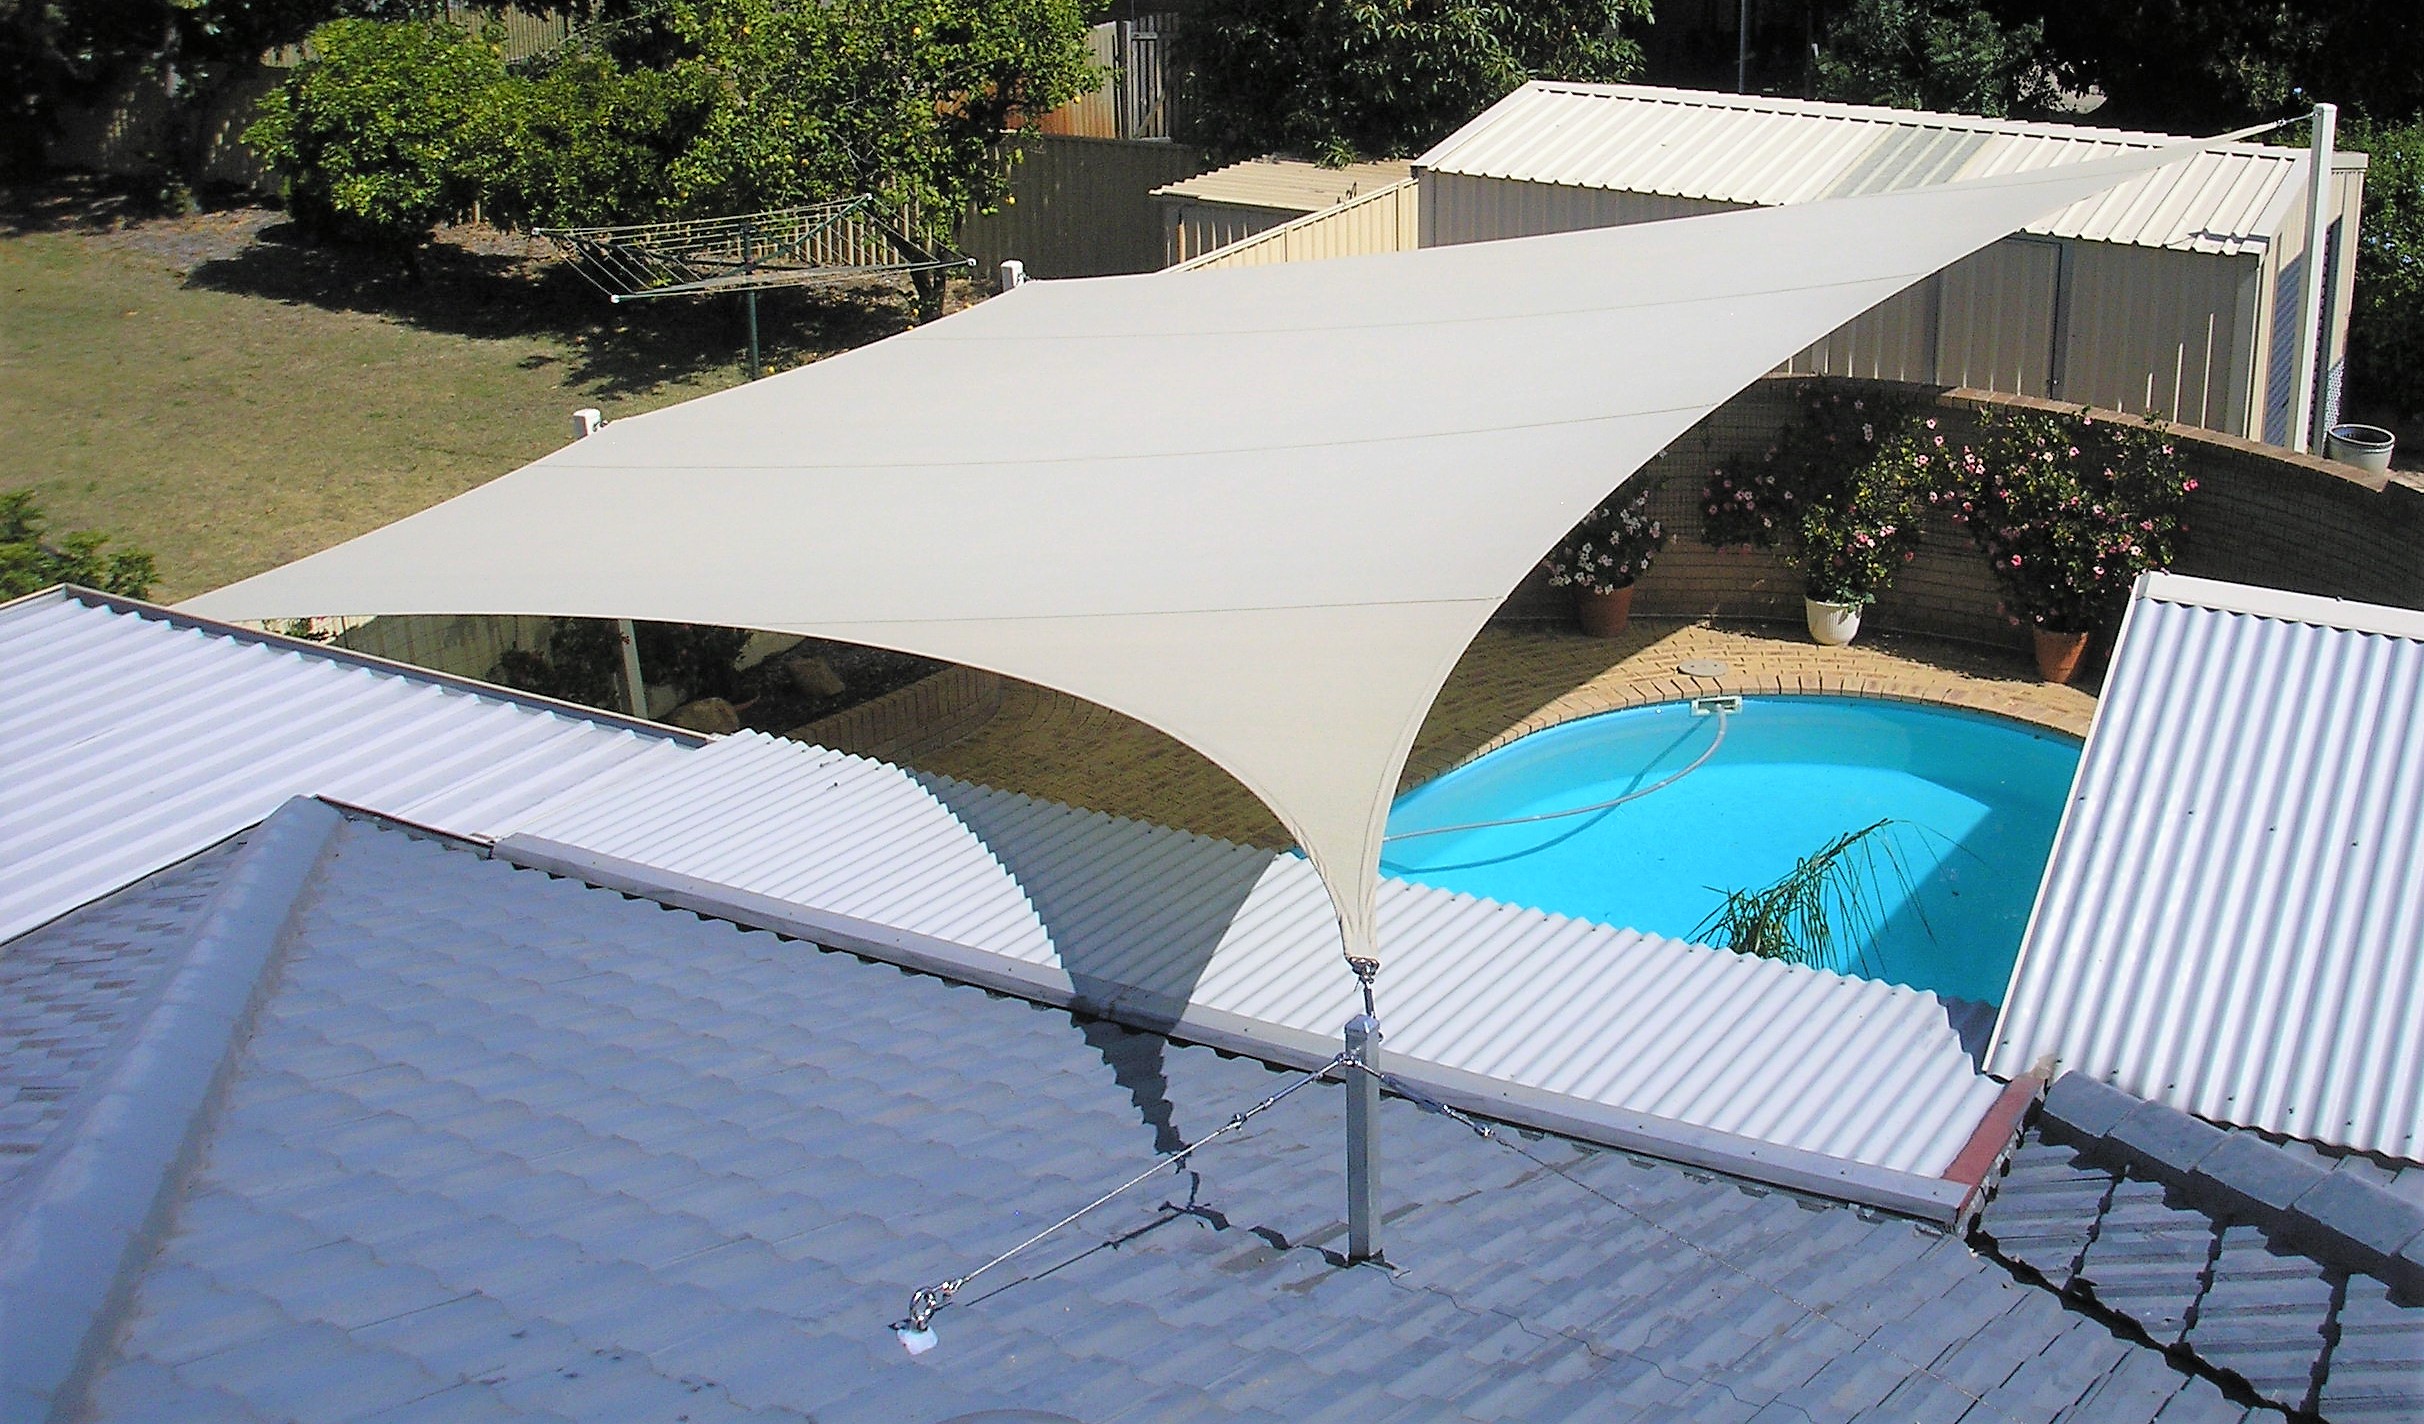 Desert Sand Sail was designed to provide both shade and privacy for people using the pool.